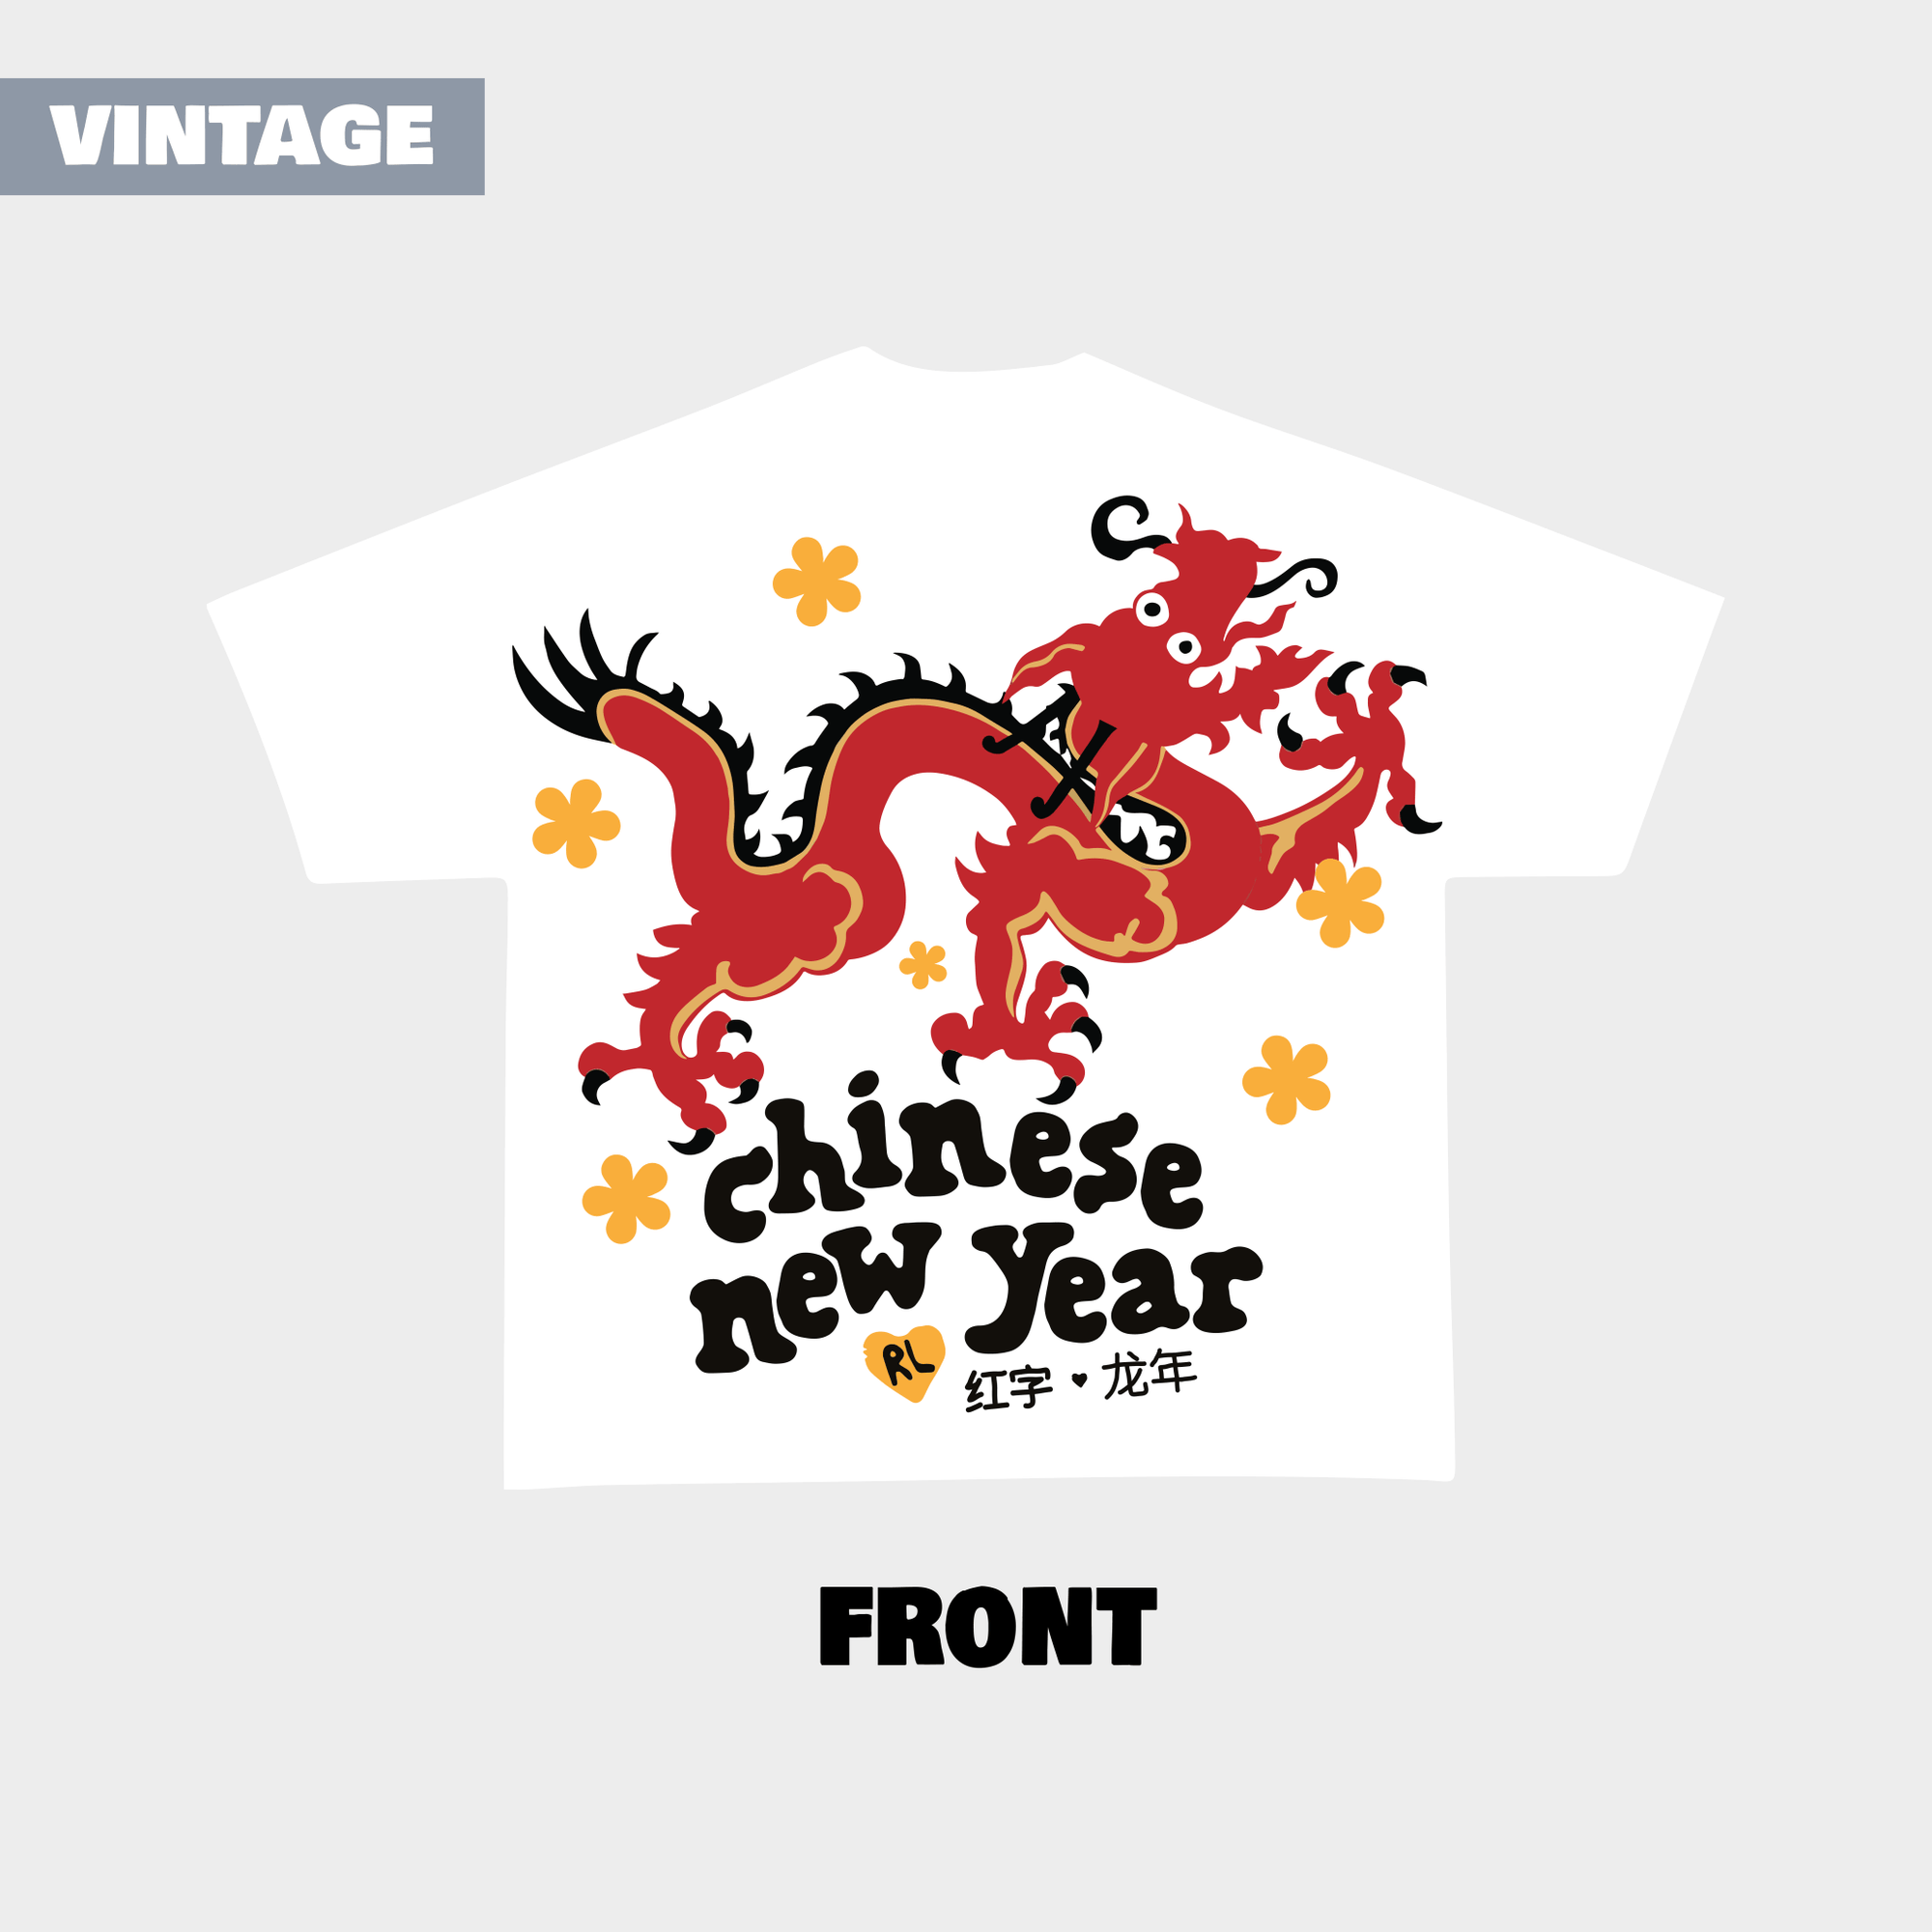 "Chinese New Year" Vintage Tee - White - RED LETTERS